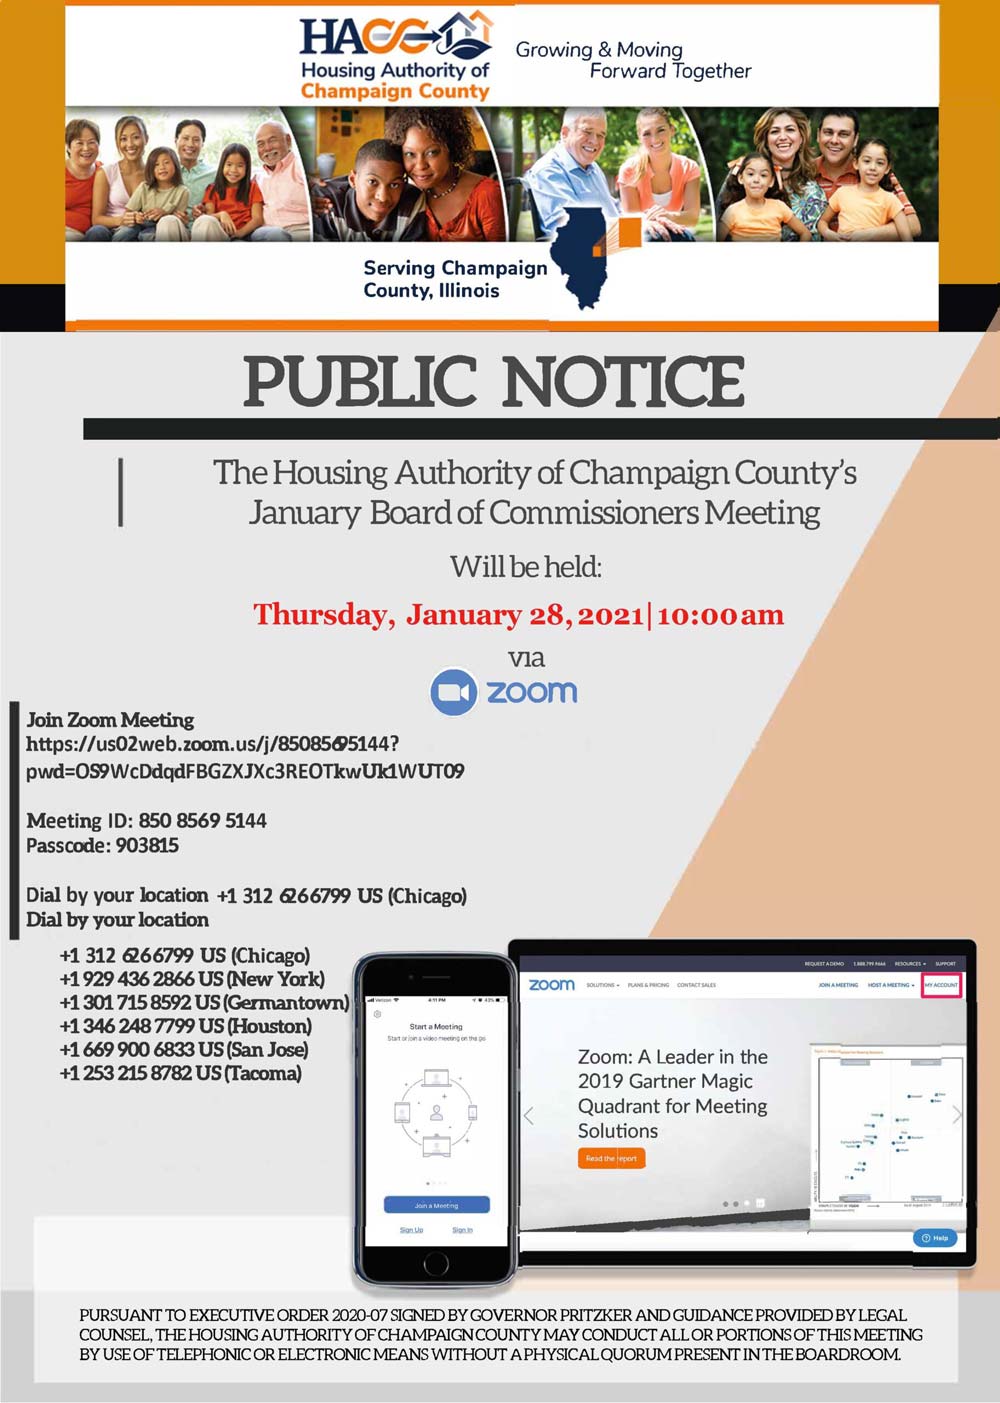 January Board of Commissioners Meeting Flyer, all information as listed below.